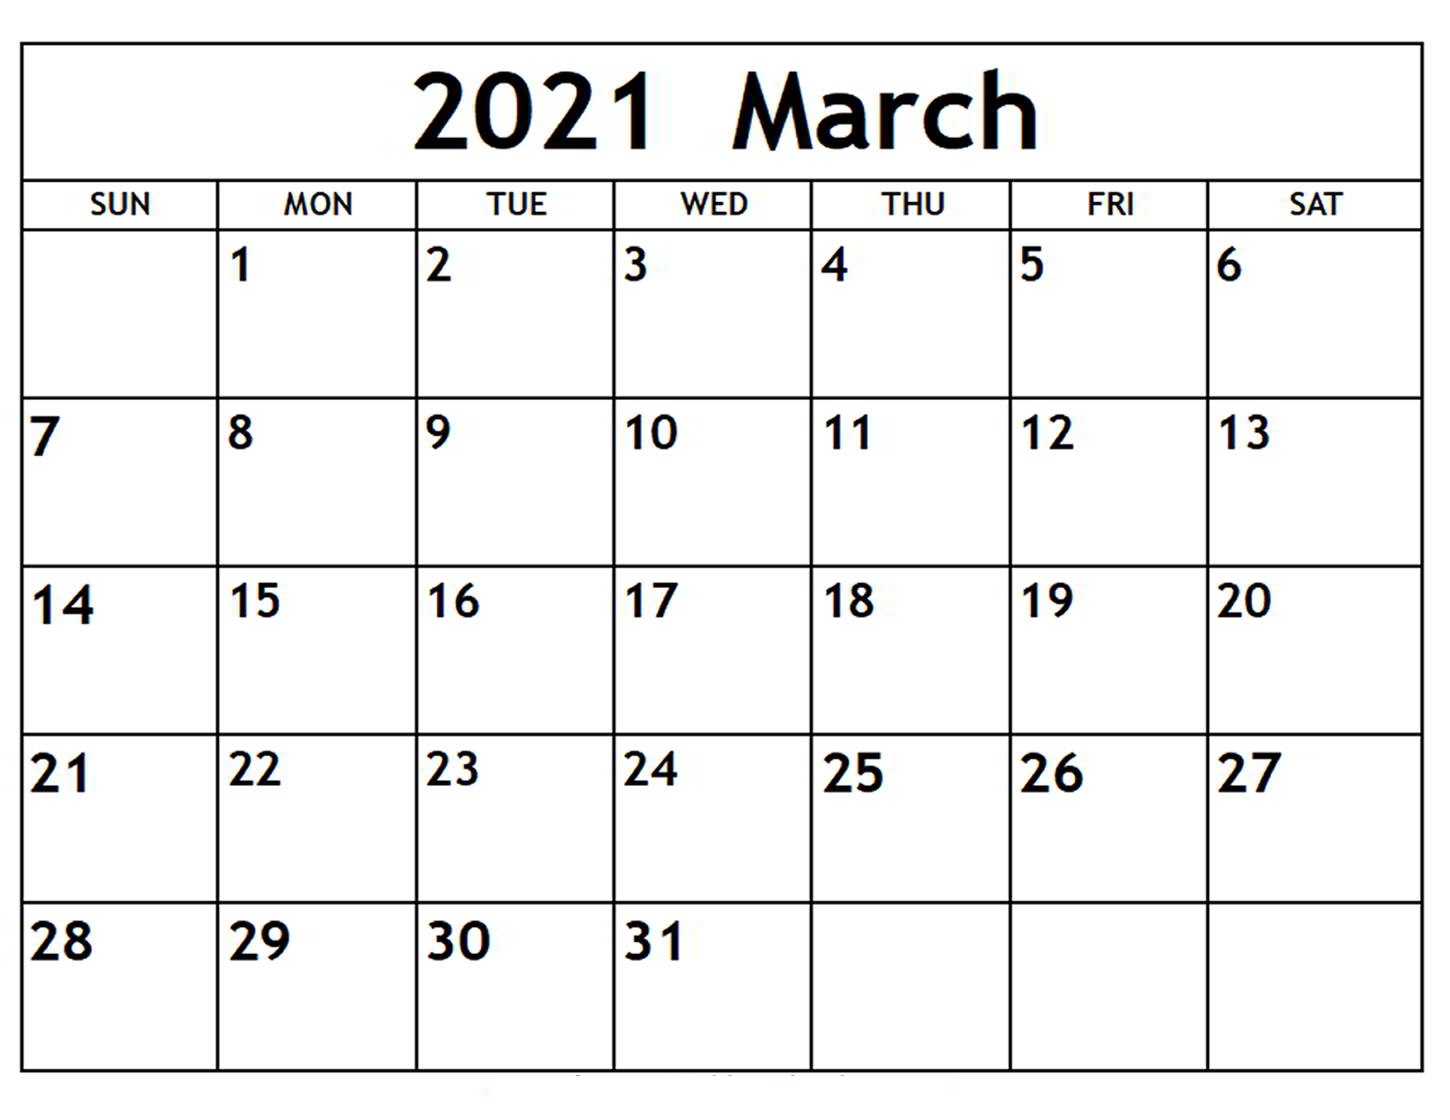 March 2021 Calendar Template With Holidays - Printable ...